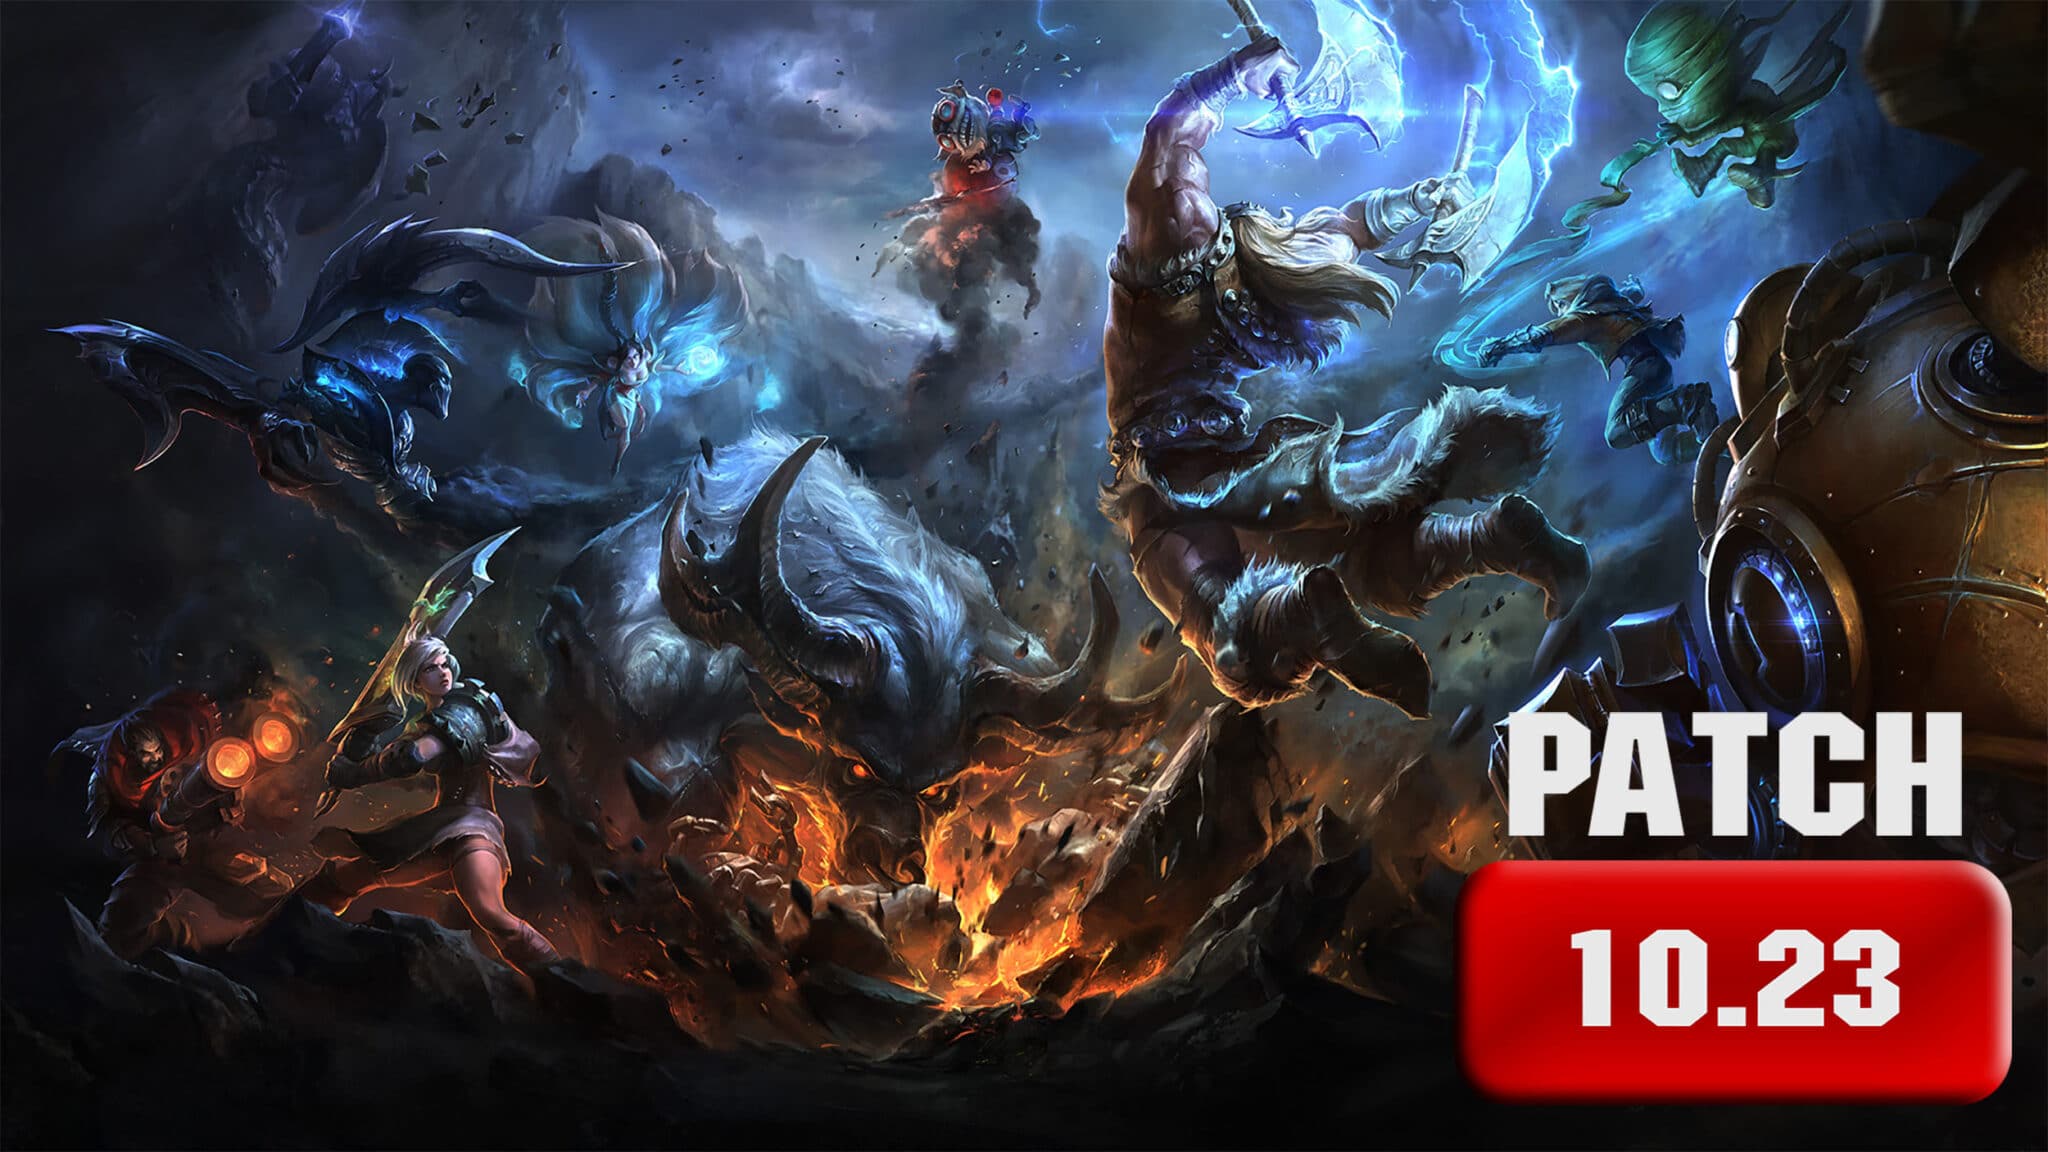 League of Legends 10.23 Patch Released Today, Adding New Item Tier